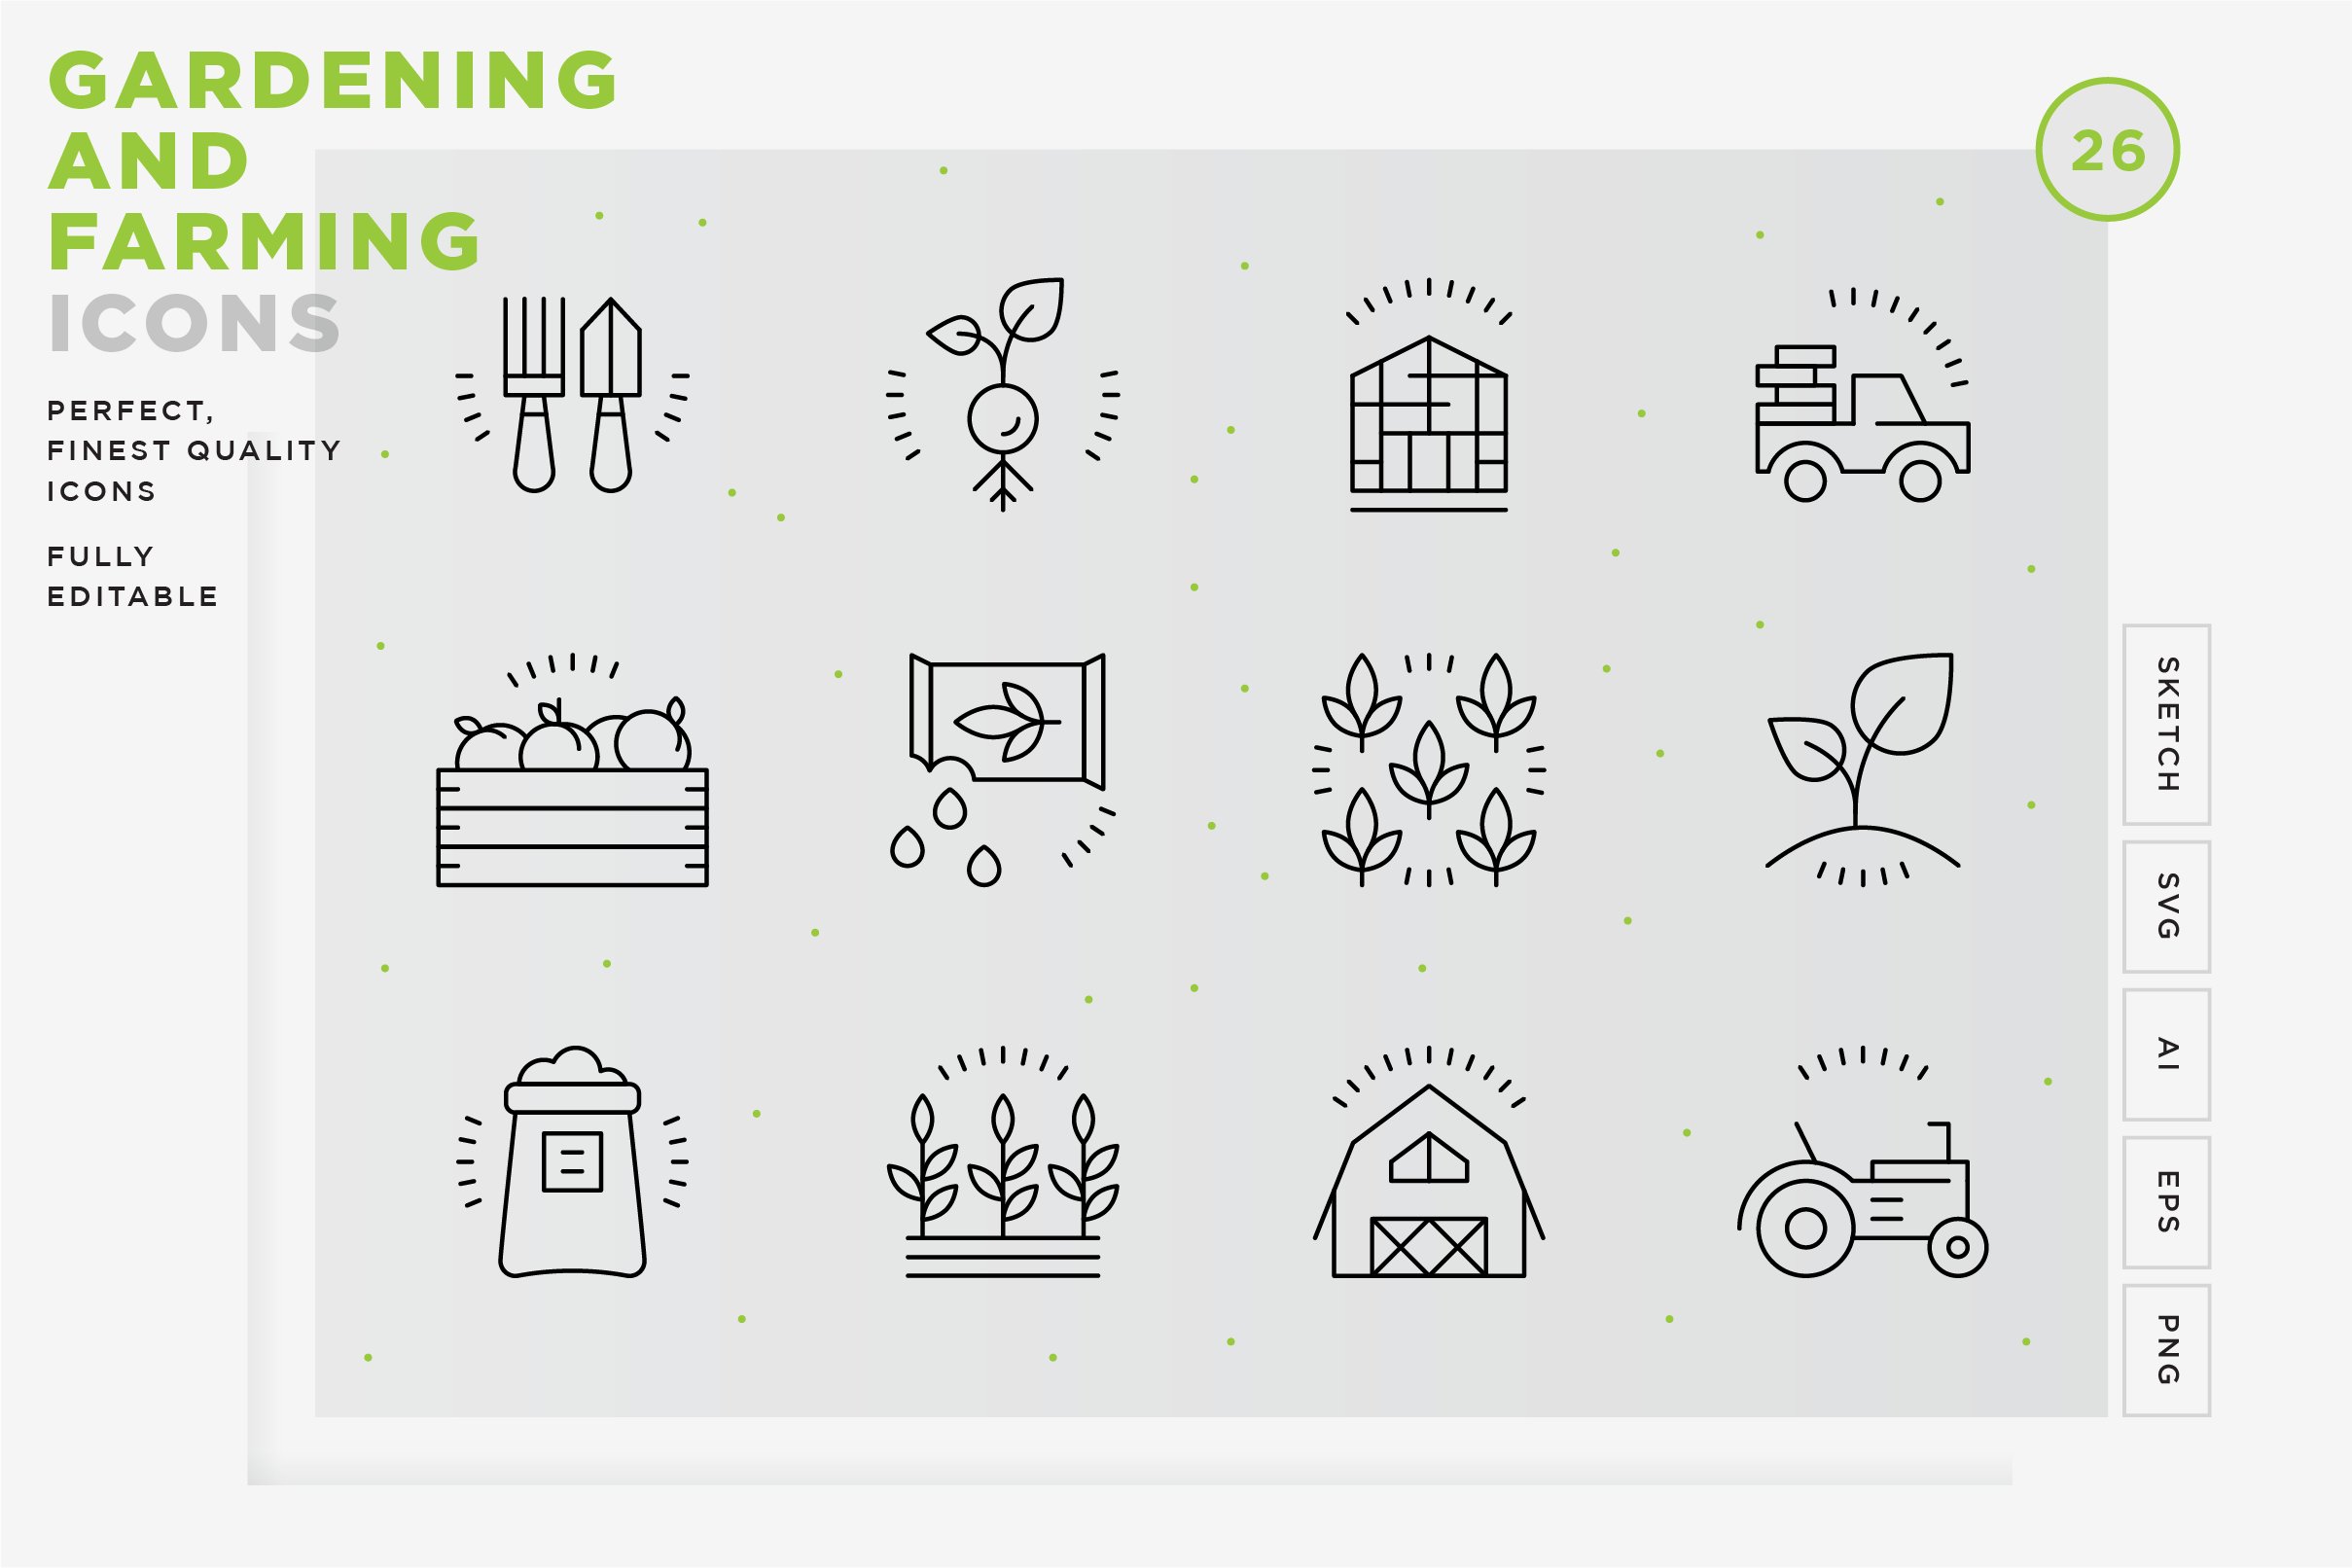 Gardening and Farming icons cover image.